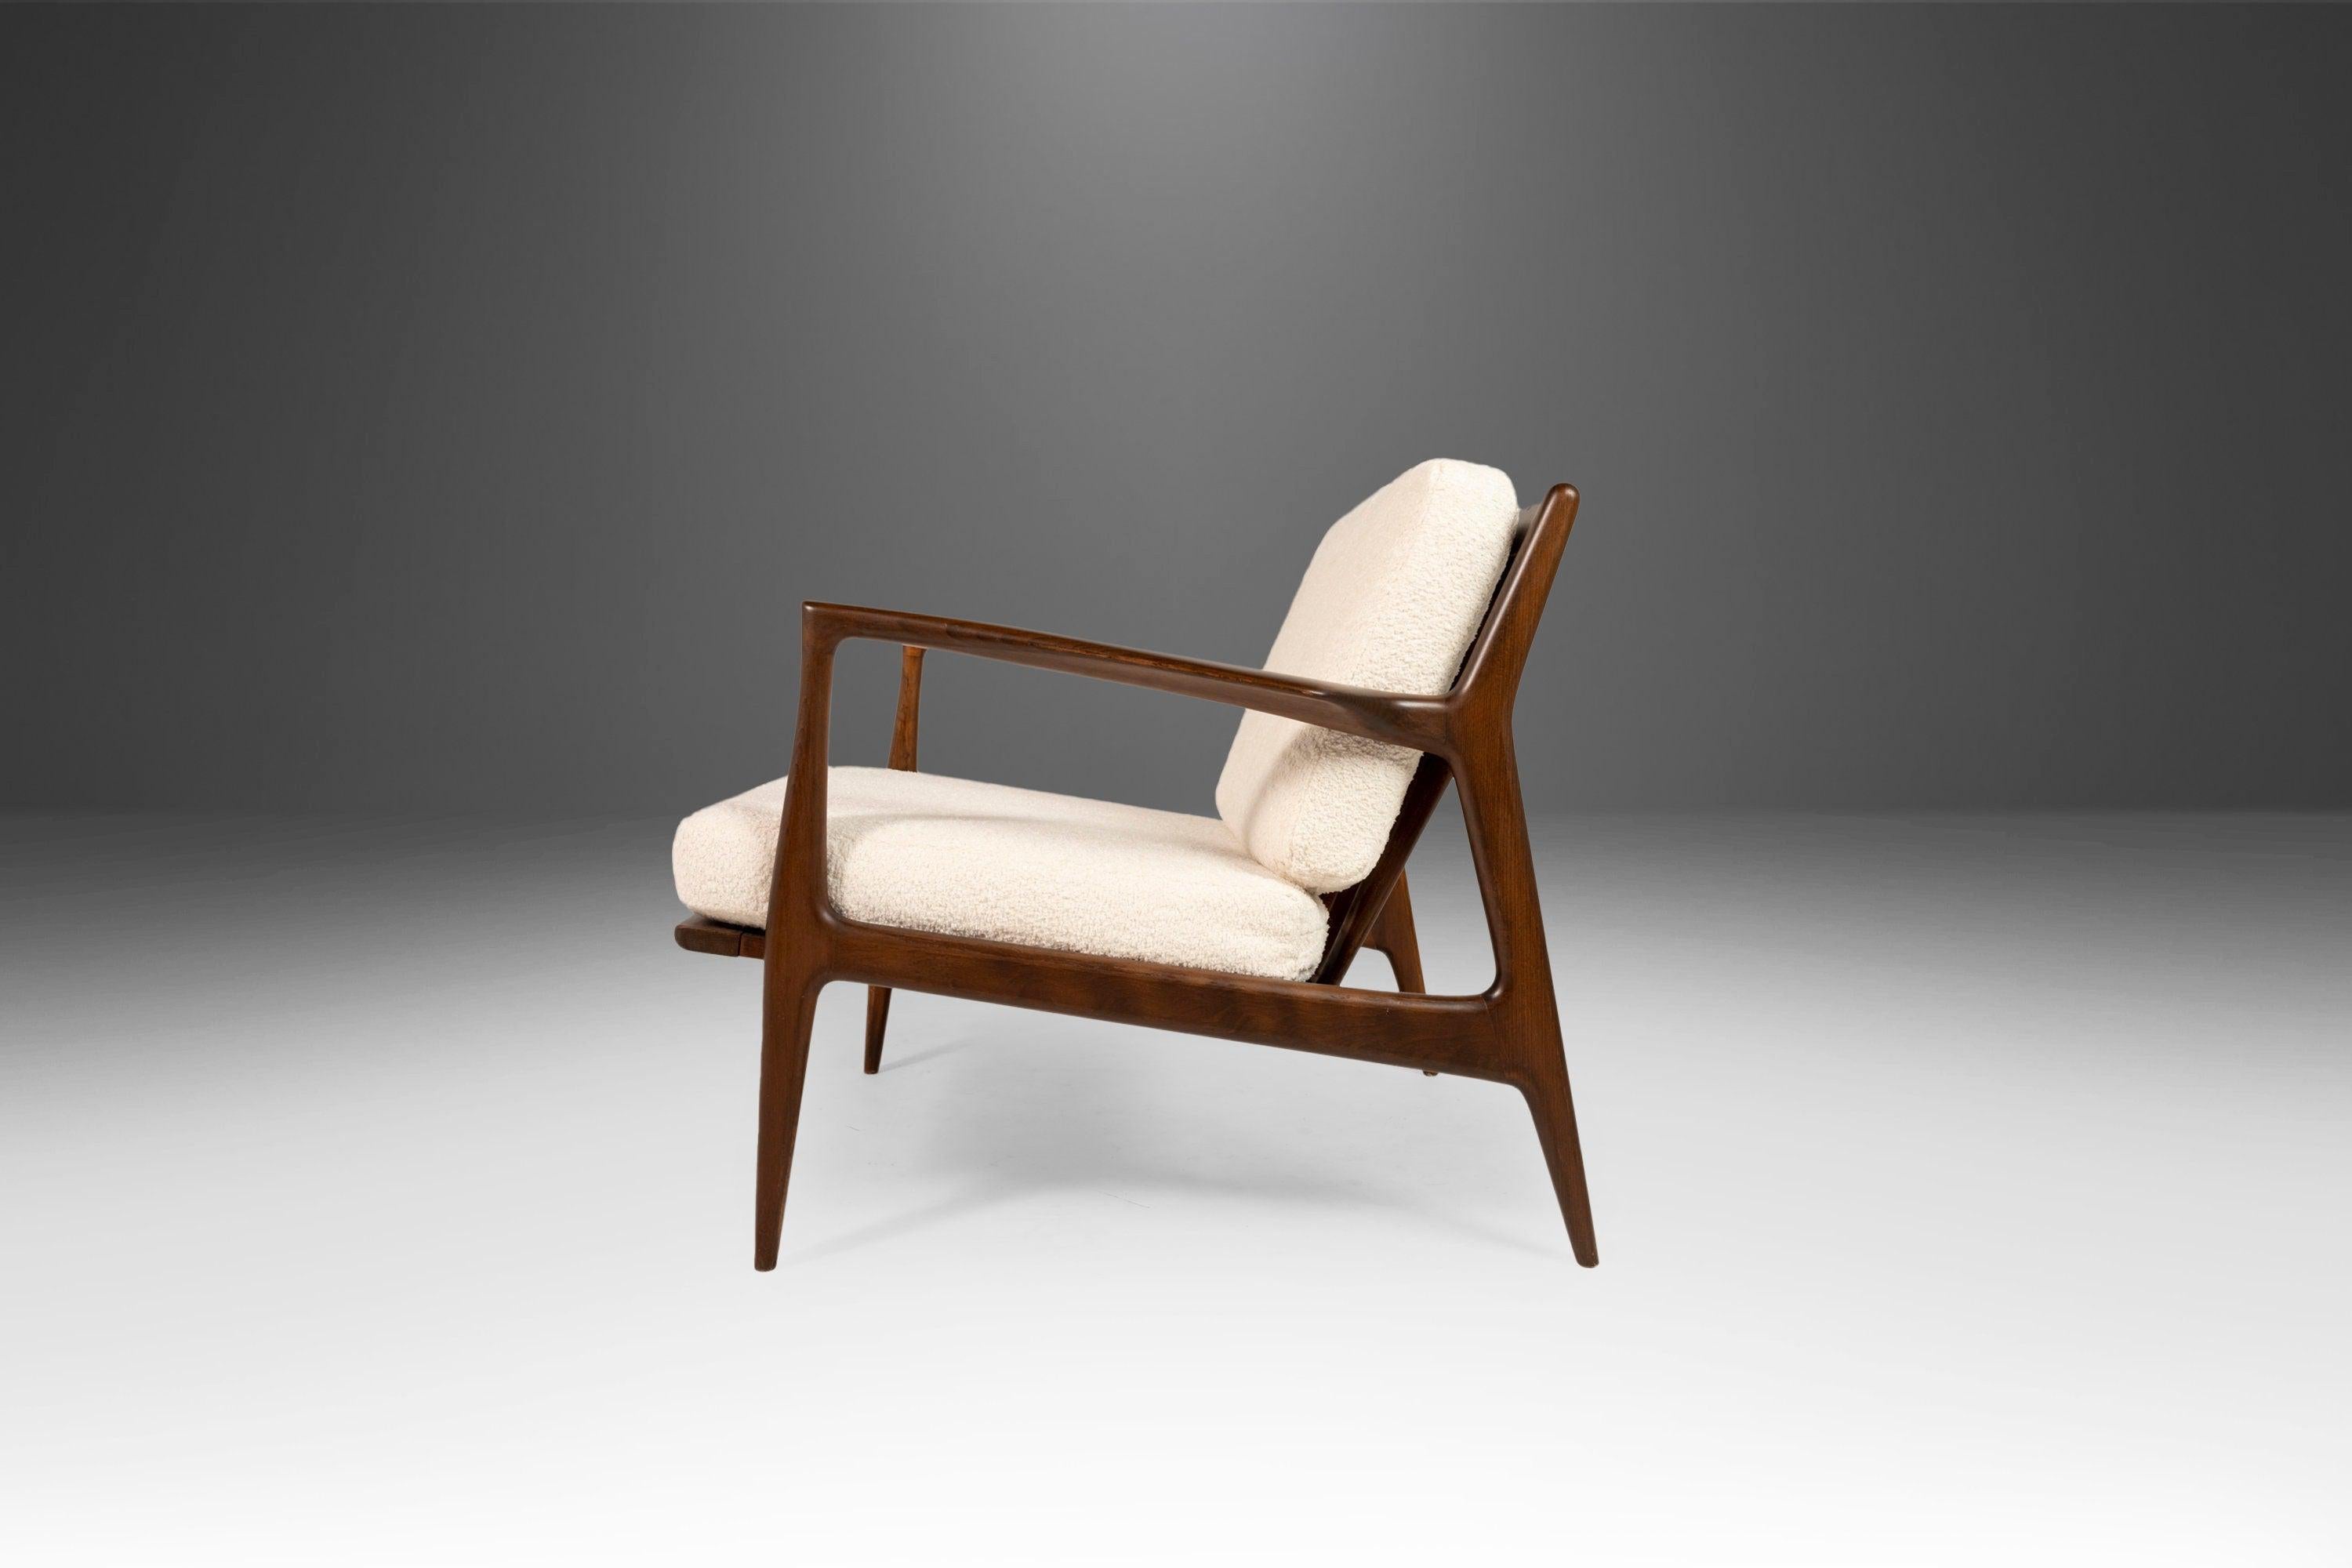 Danish Set of Two '2' 'Blade' Lounge Chairs by Ib Kofod-Larsen for Selig, Denmark, 1950